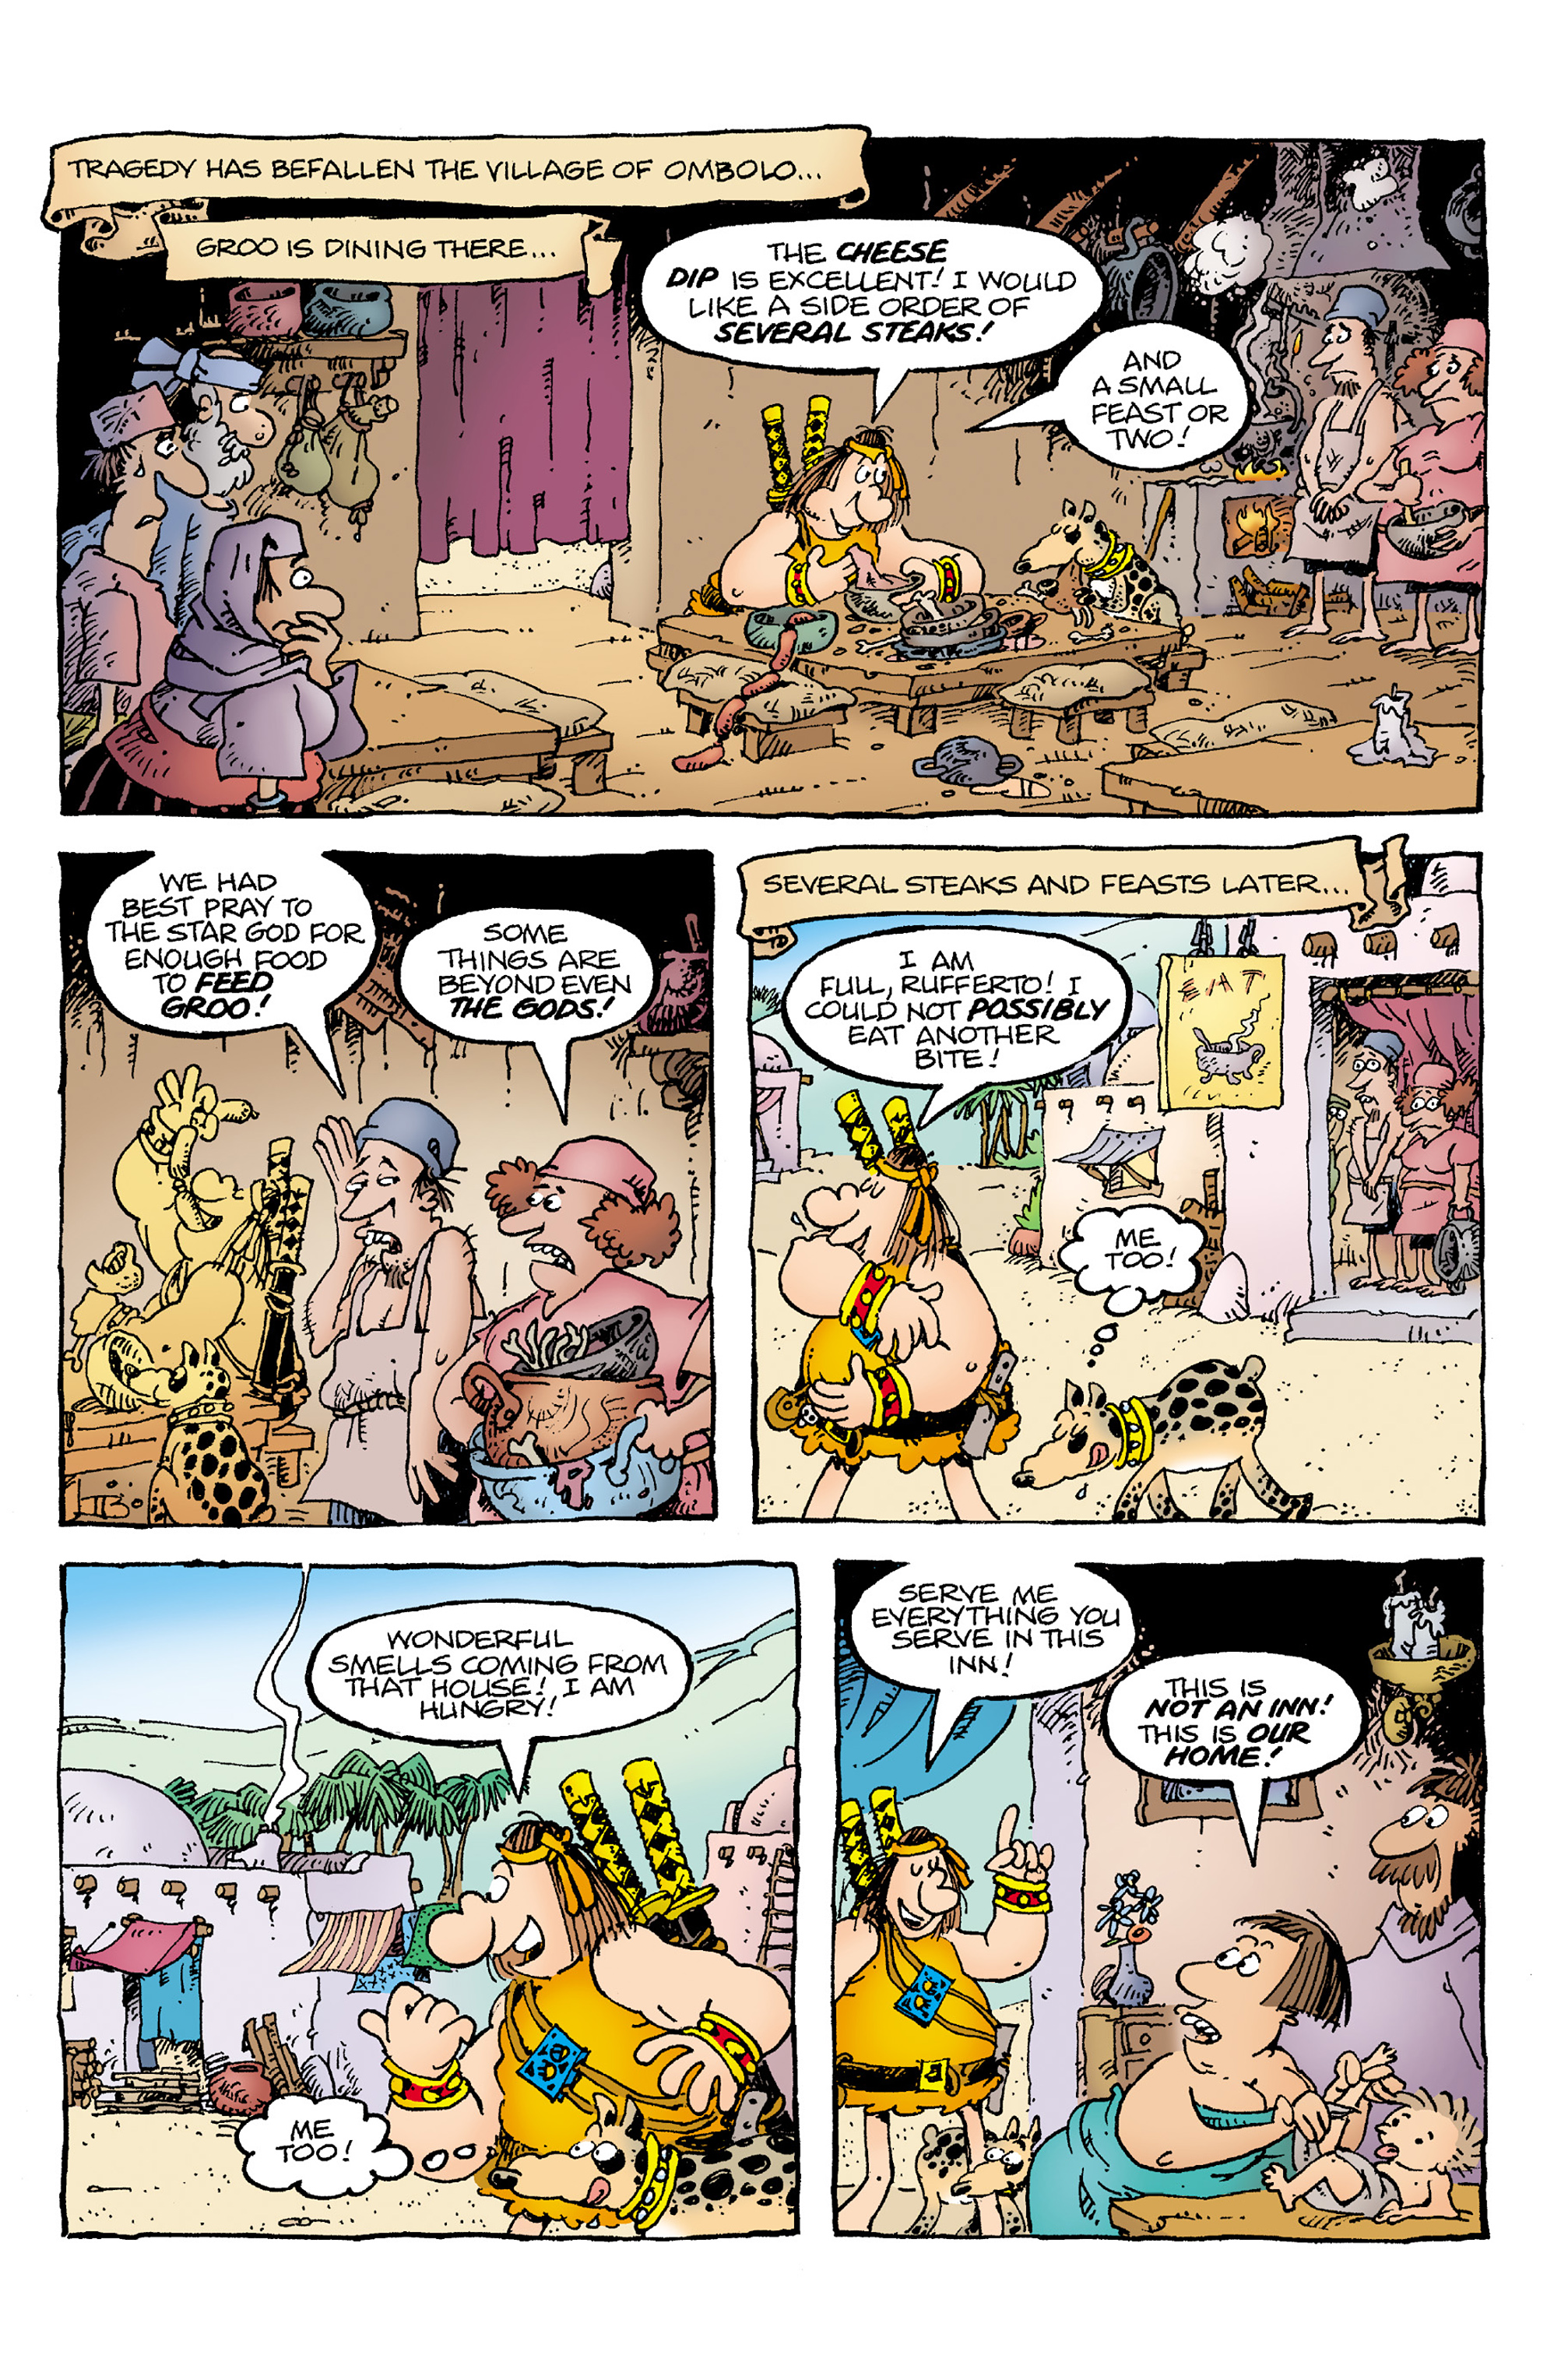 Groo: Fray of the Gods (2016-): Chapter 3 - Page 3